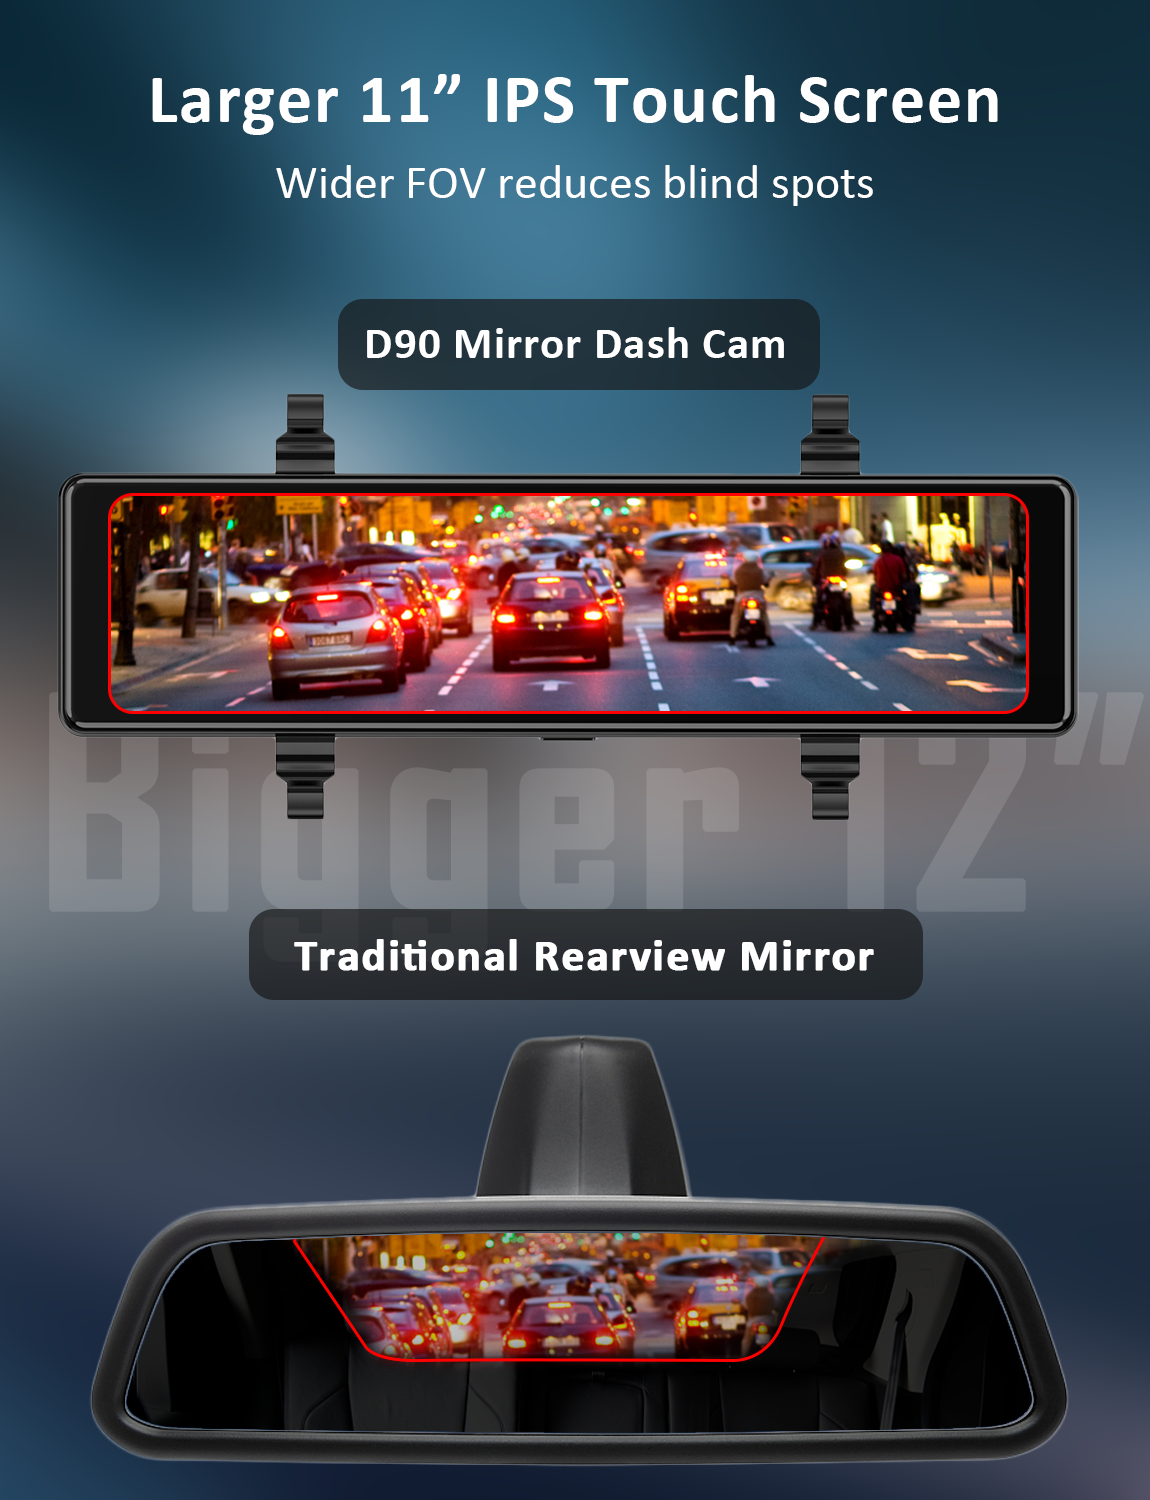 Compared to traditional car rearview mirror, the D90 11-inch screen can provide a wider view.